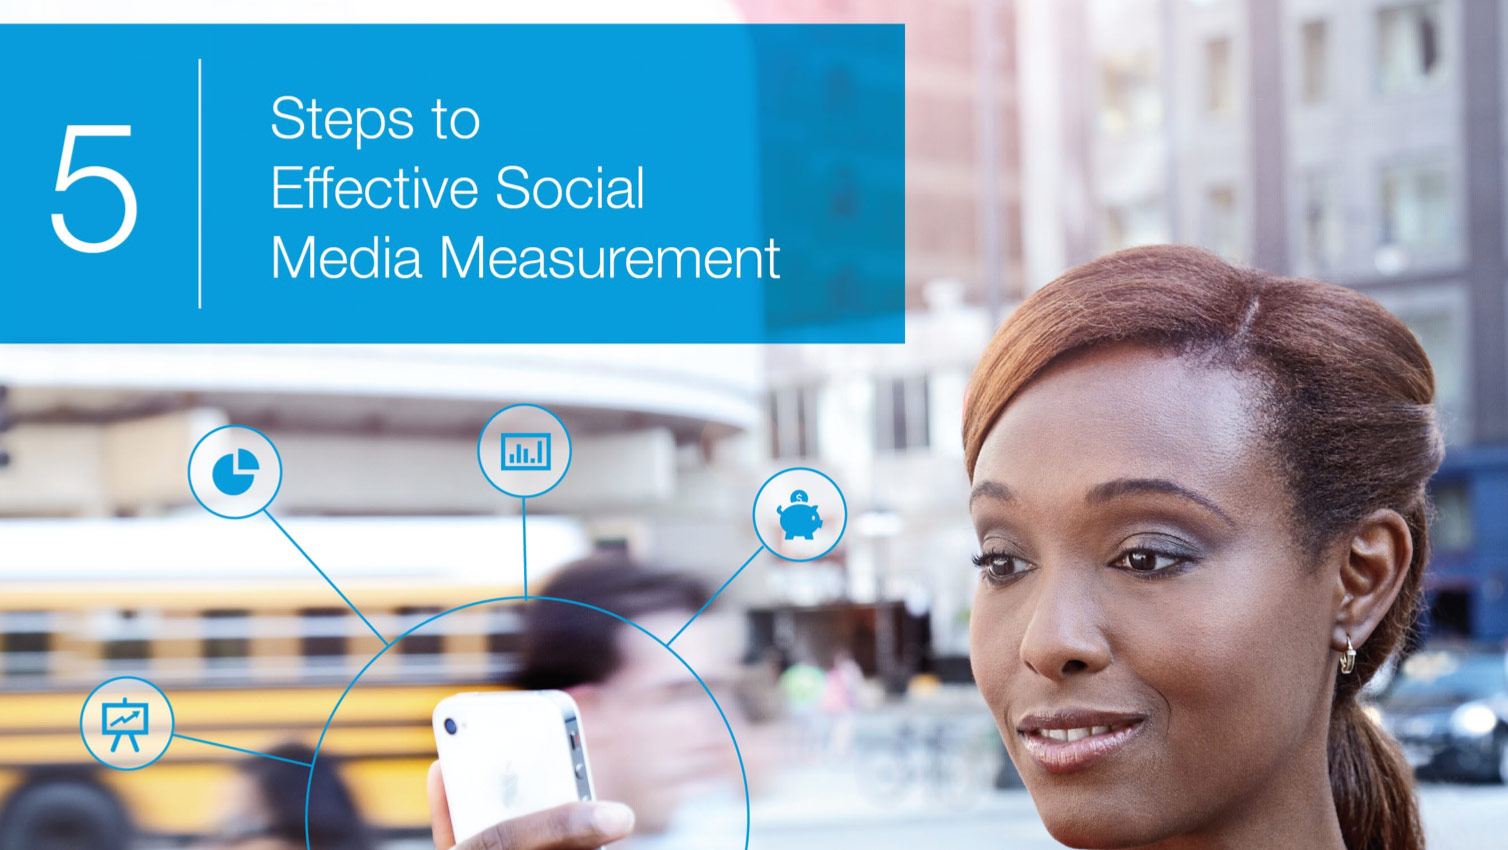 5 Steps to Effective Social Media Measurement #Infographic